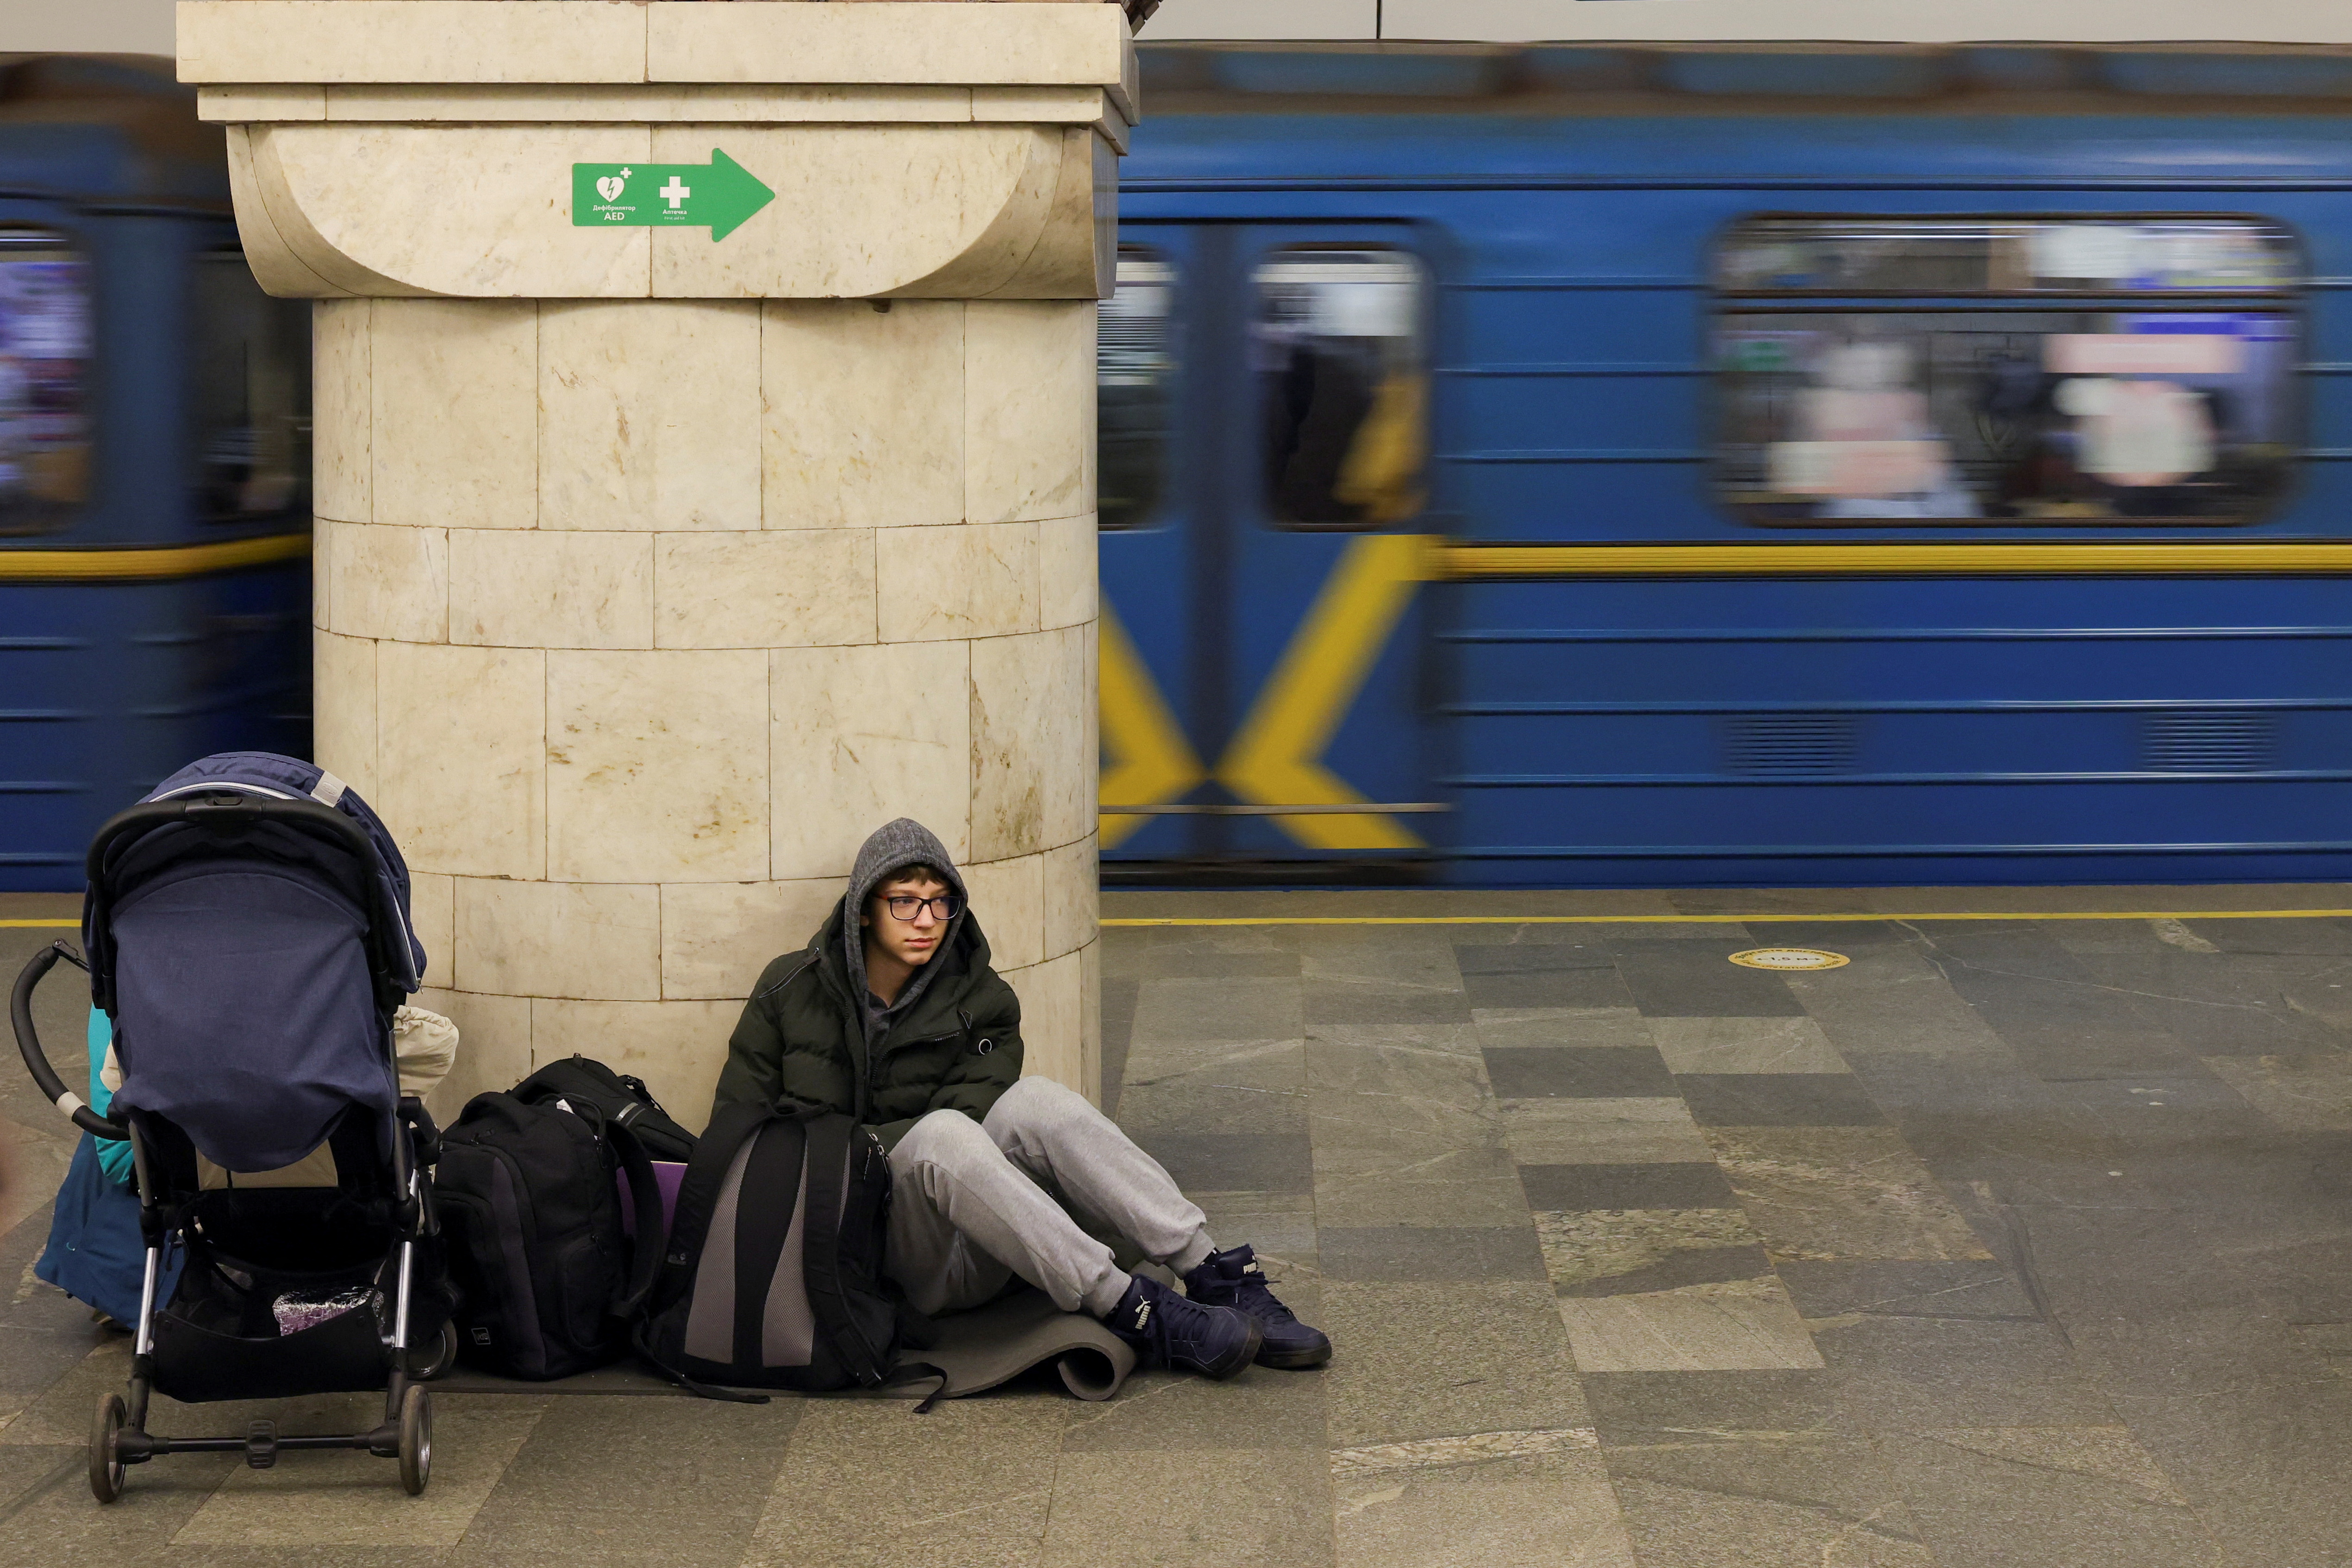 A boy sits at Kyiv metro station, after Russia launched a massive military operation against Ukraine, in Kyiv, Ukraine February 25, 2022. REUTERS/Antonio Bronic